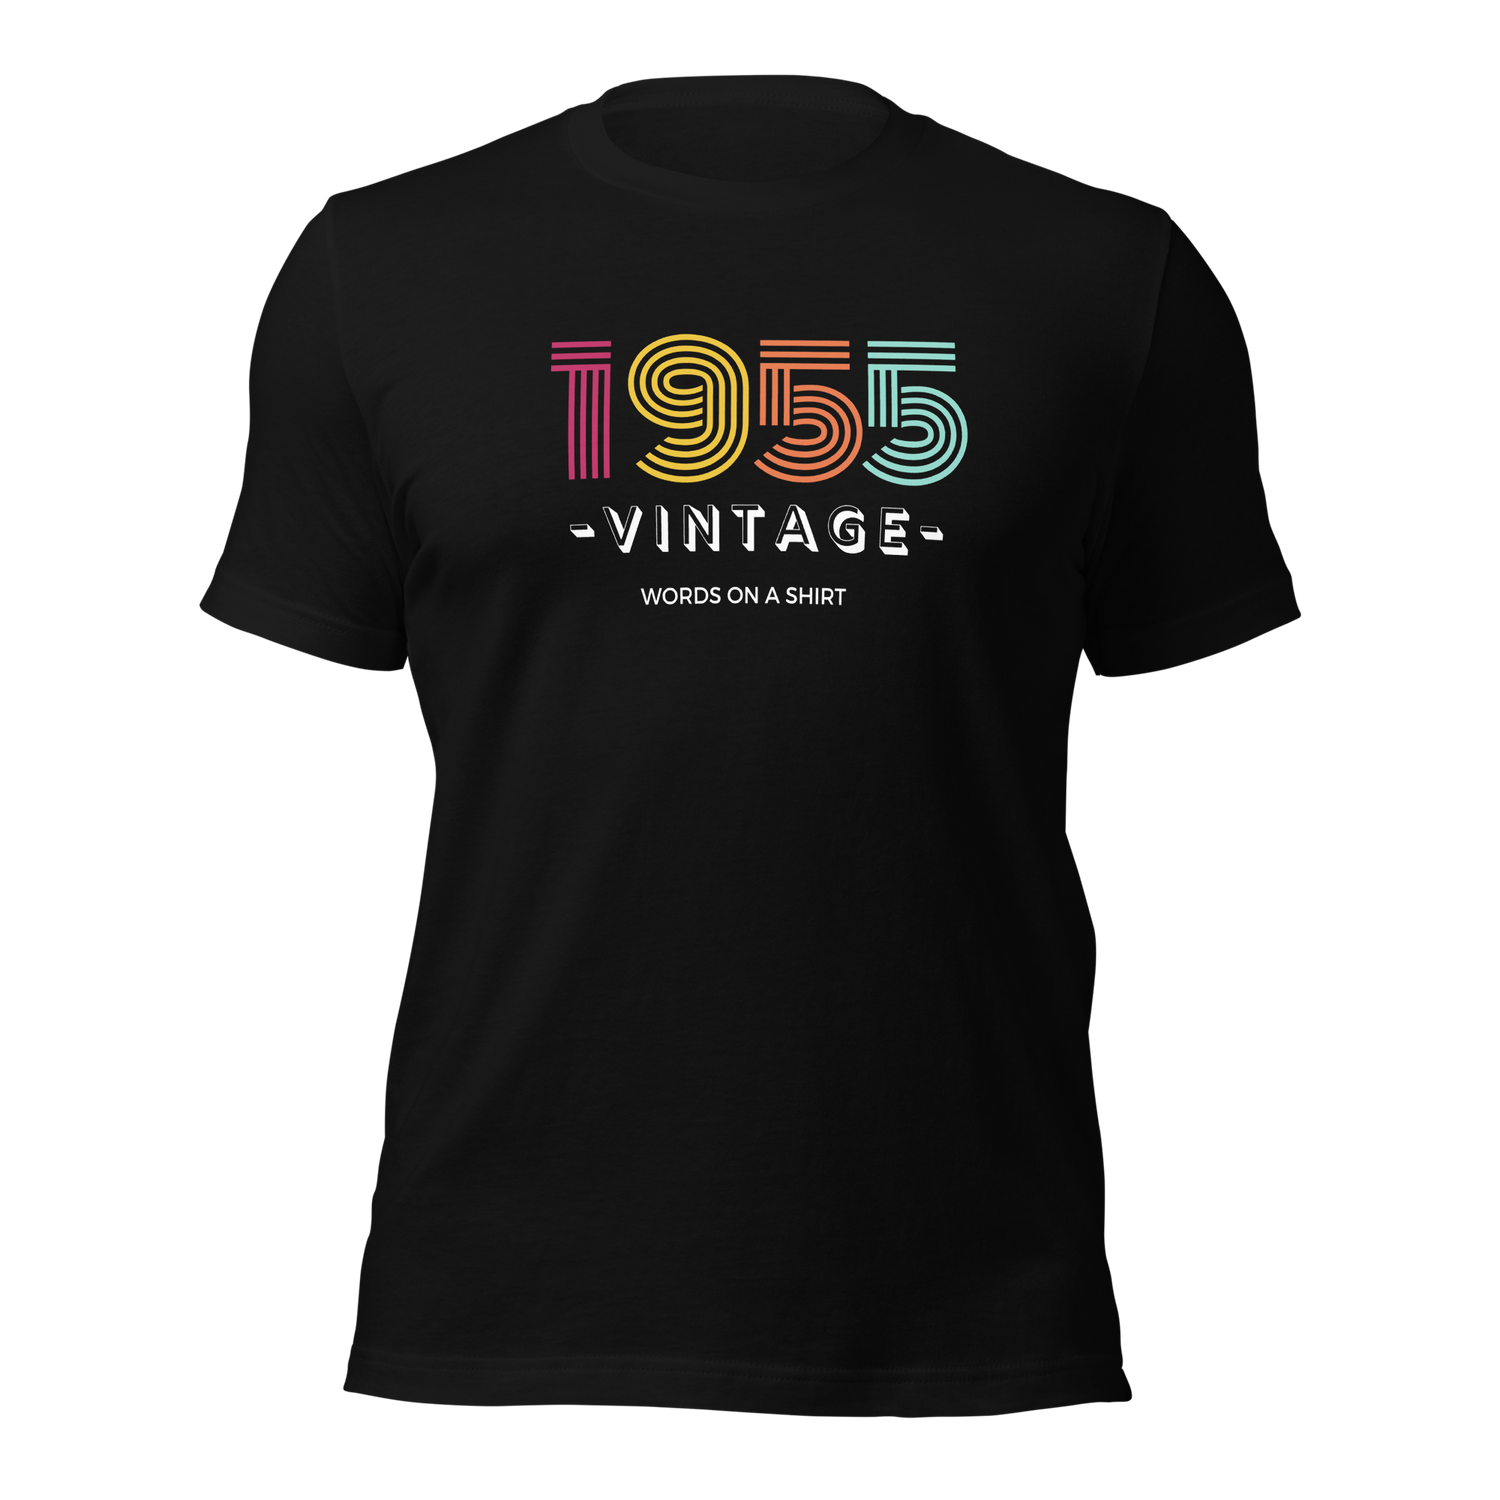 "Get ready to rock your birth year with our Unisex T-Shirt-My Year! Made with premium materials, it's soft, breathable, and has the perfect amount of stretch. Stand out with the playful 'My Year' design - a definite conversation starter!"